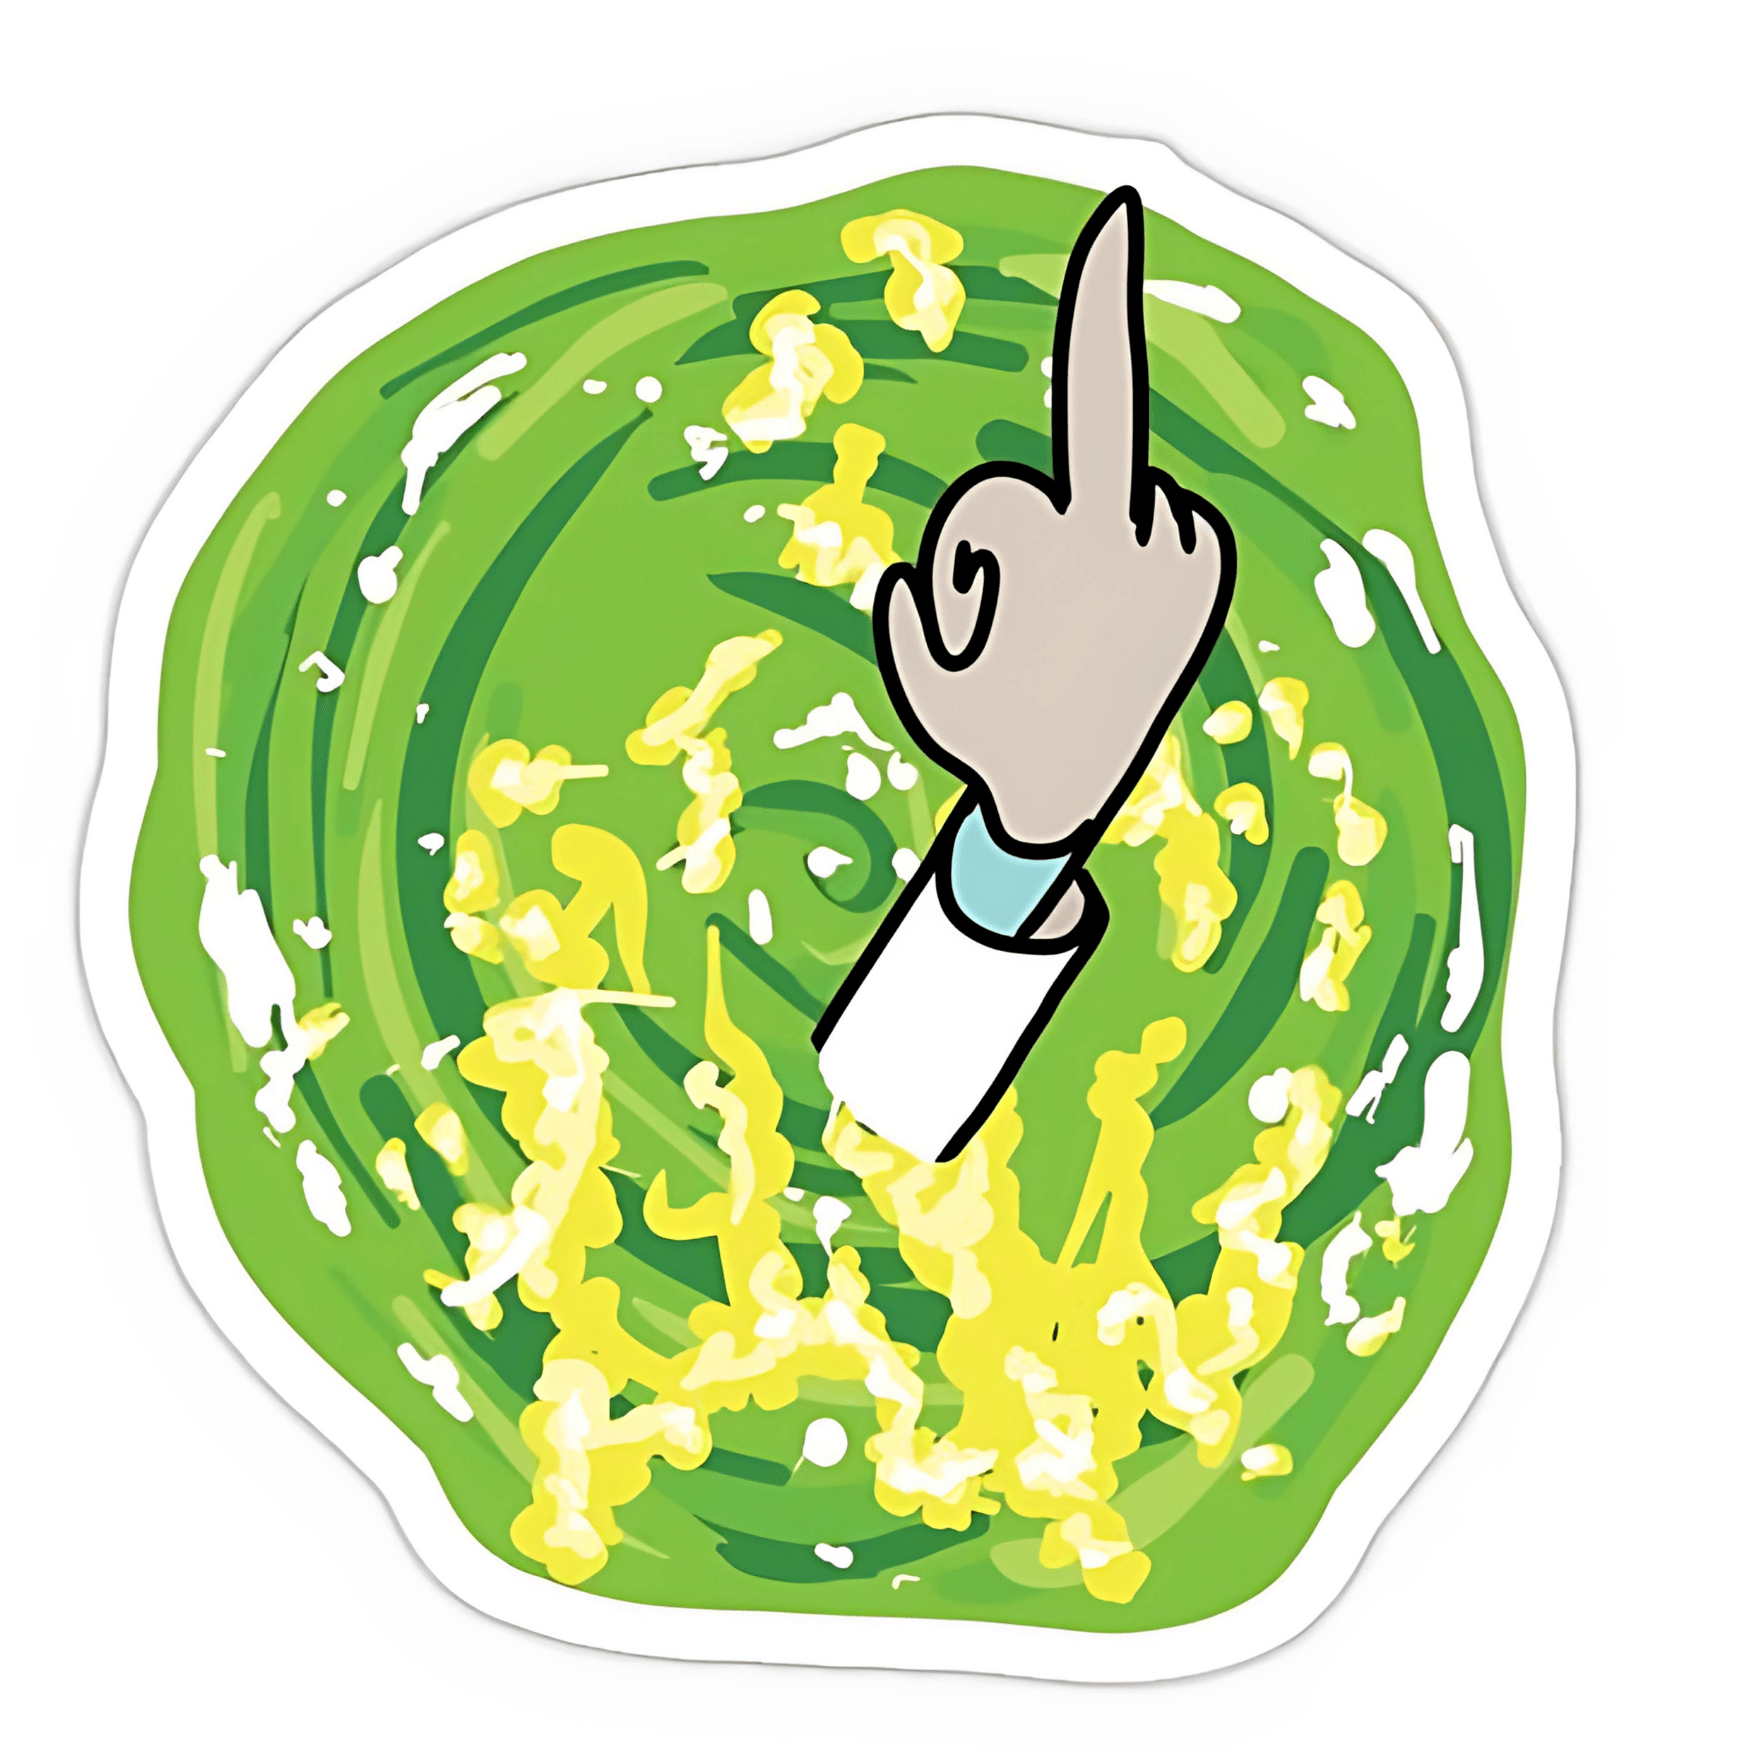 Portal of Rick and Morty sticker 6cm